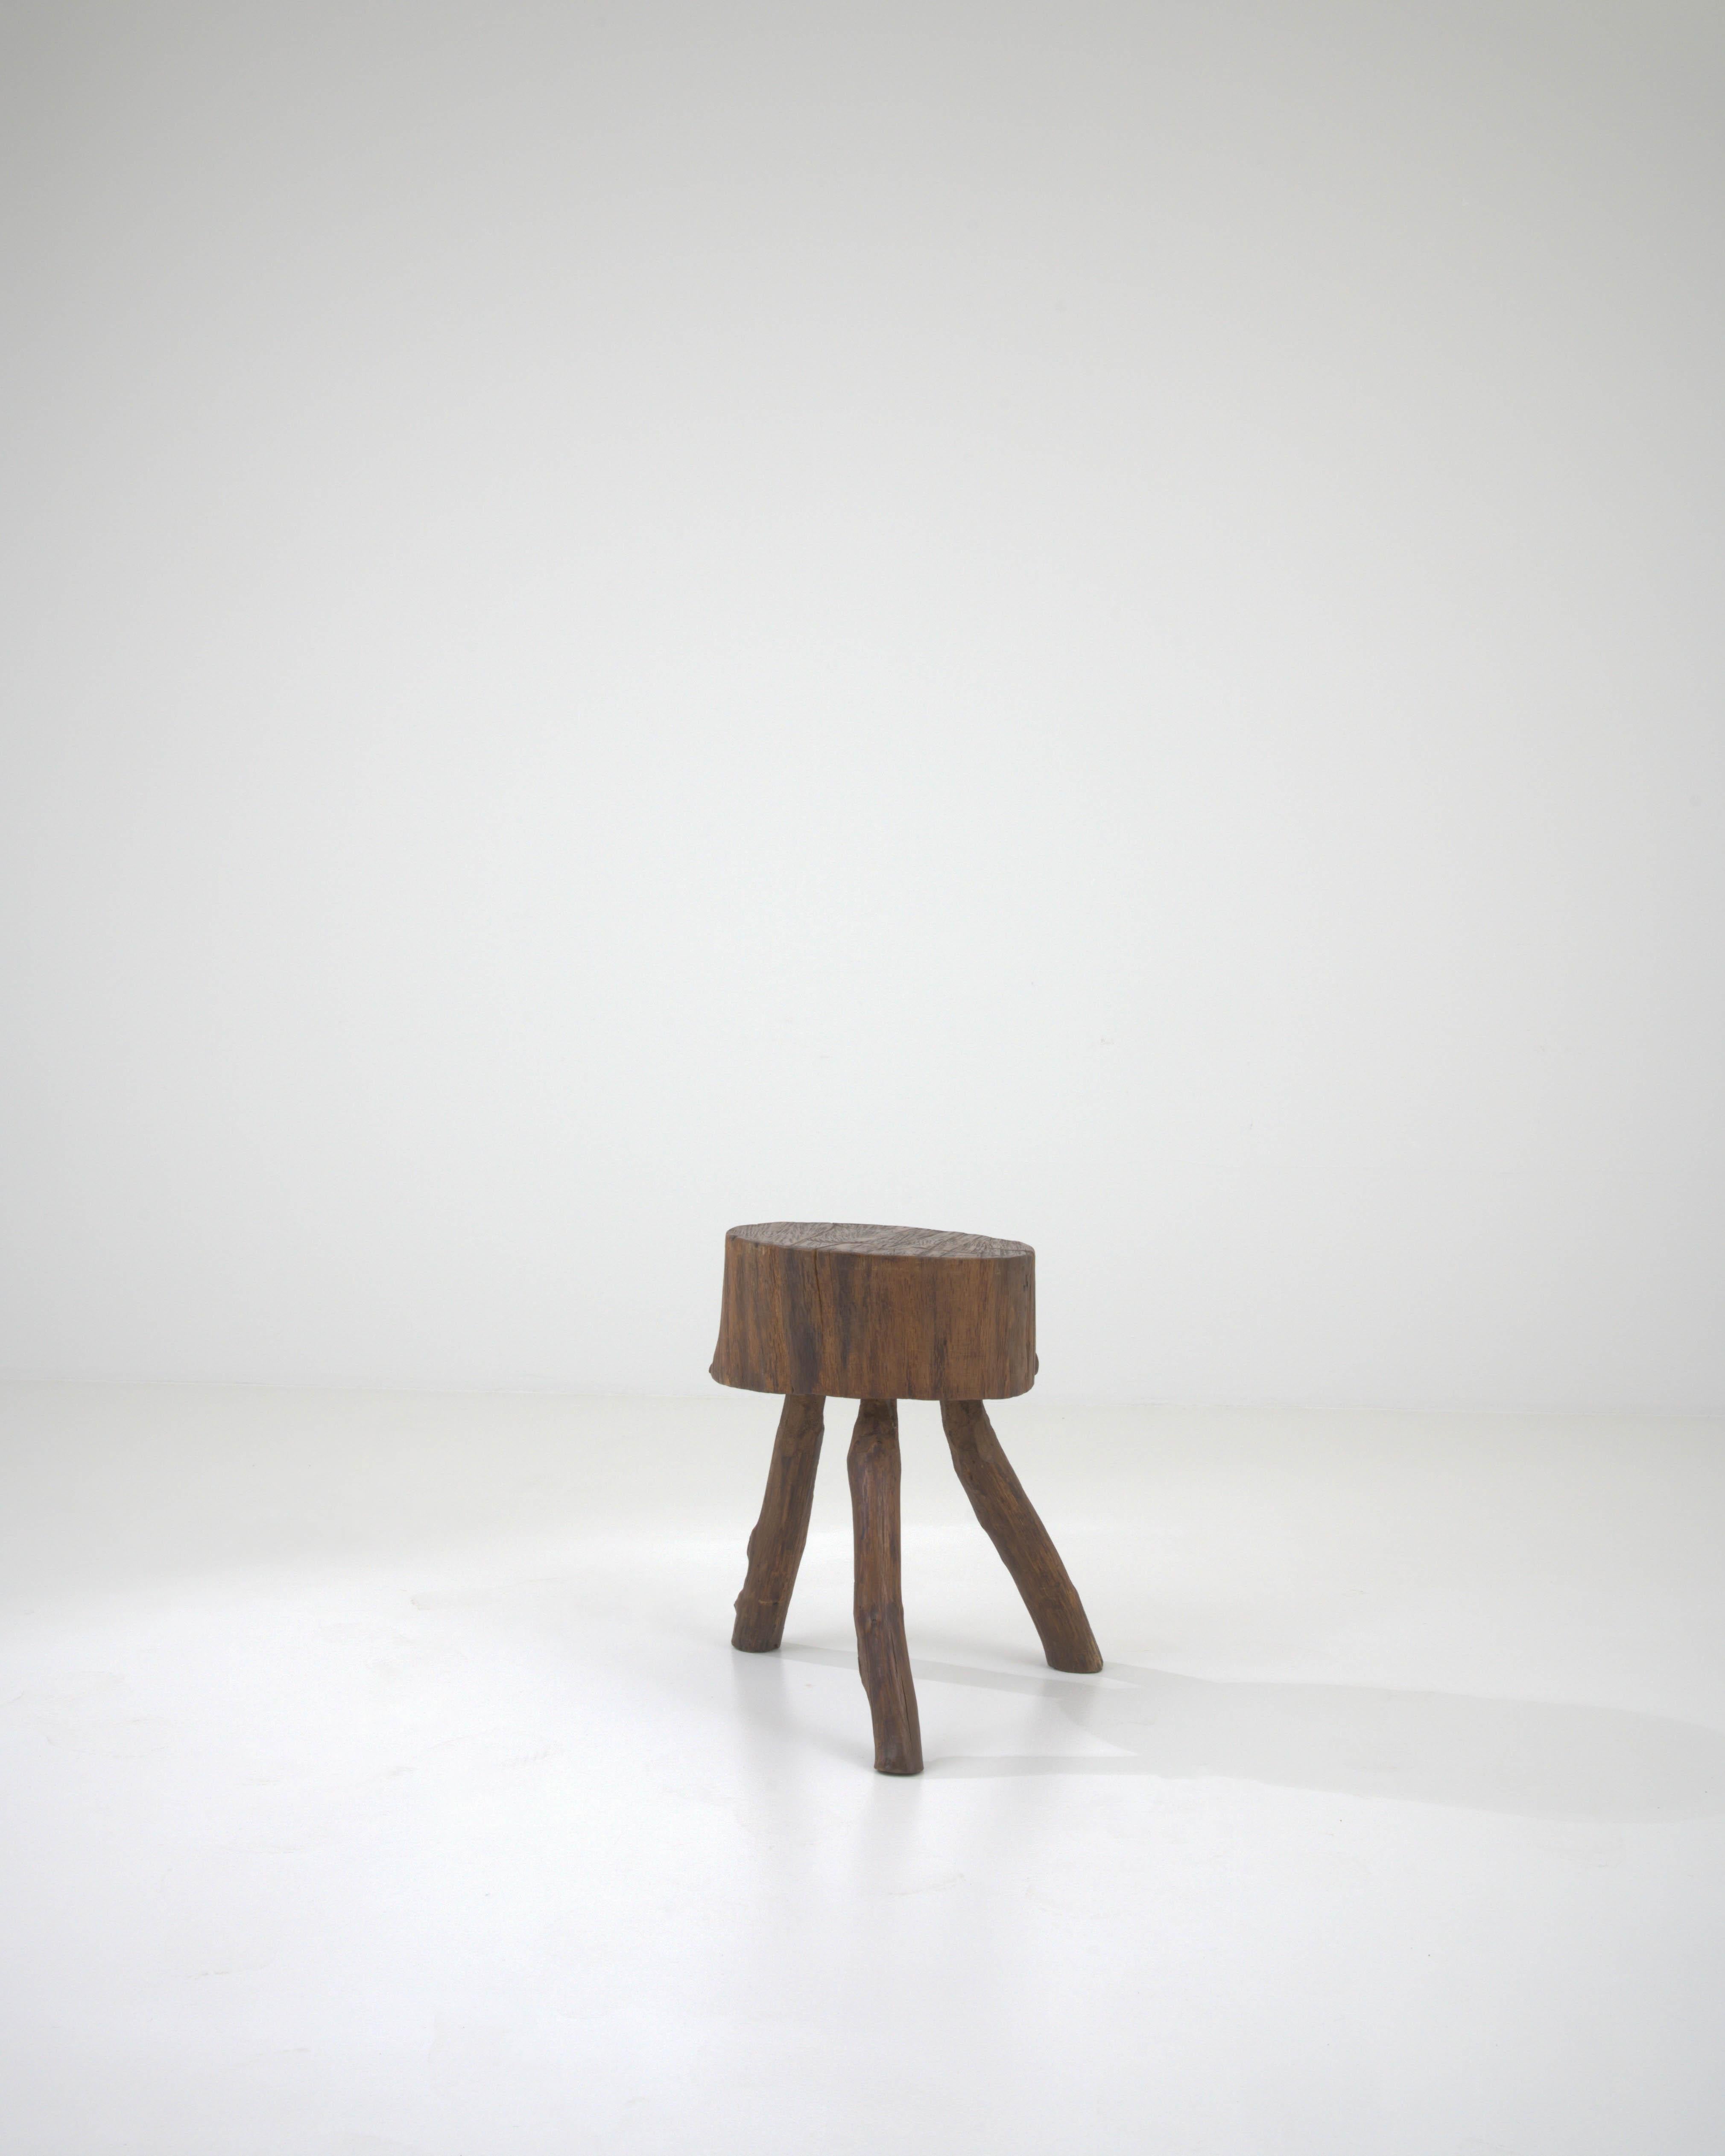 Step into the charm of the 19th century with this French Wooden Side Table, exuding a natural and primitive allure. The table boasts a distinctive round seat, offering a rustic and raw aesthetic reminiscent of its organic origins. Supported by three